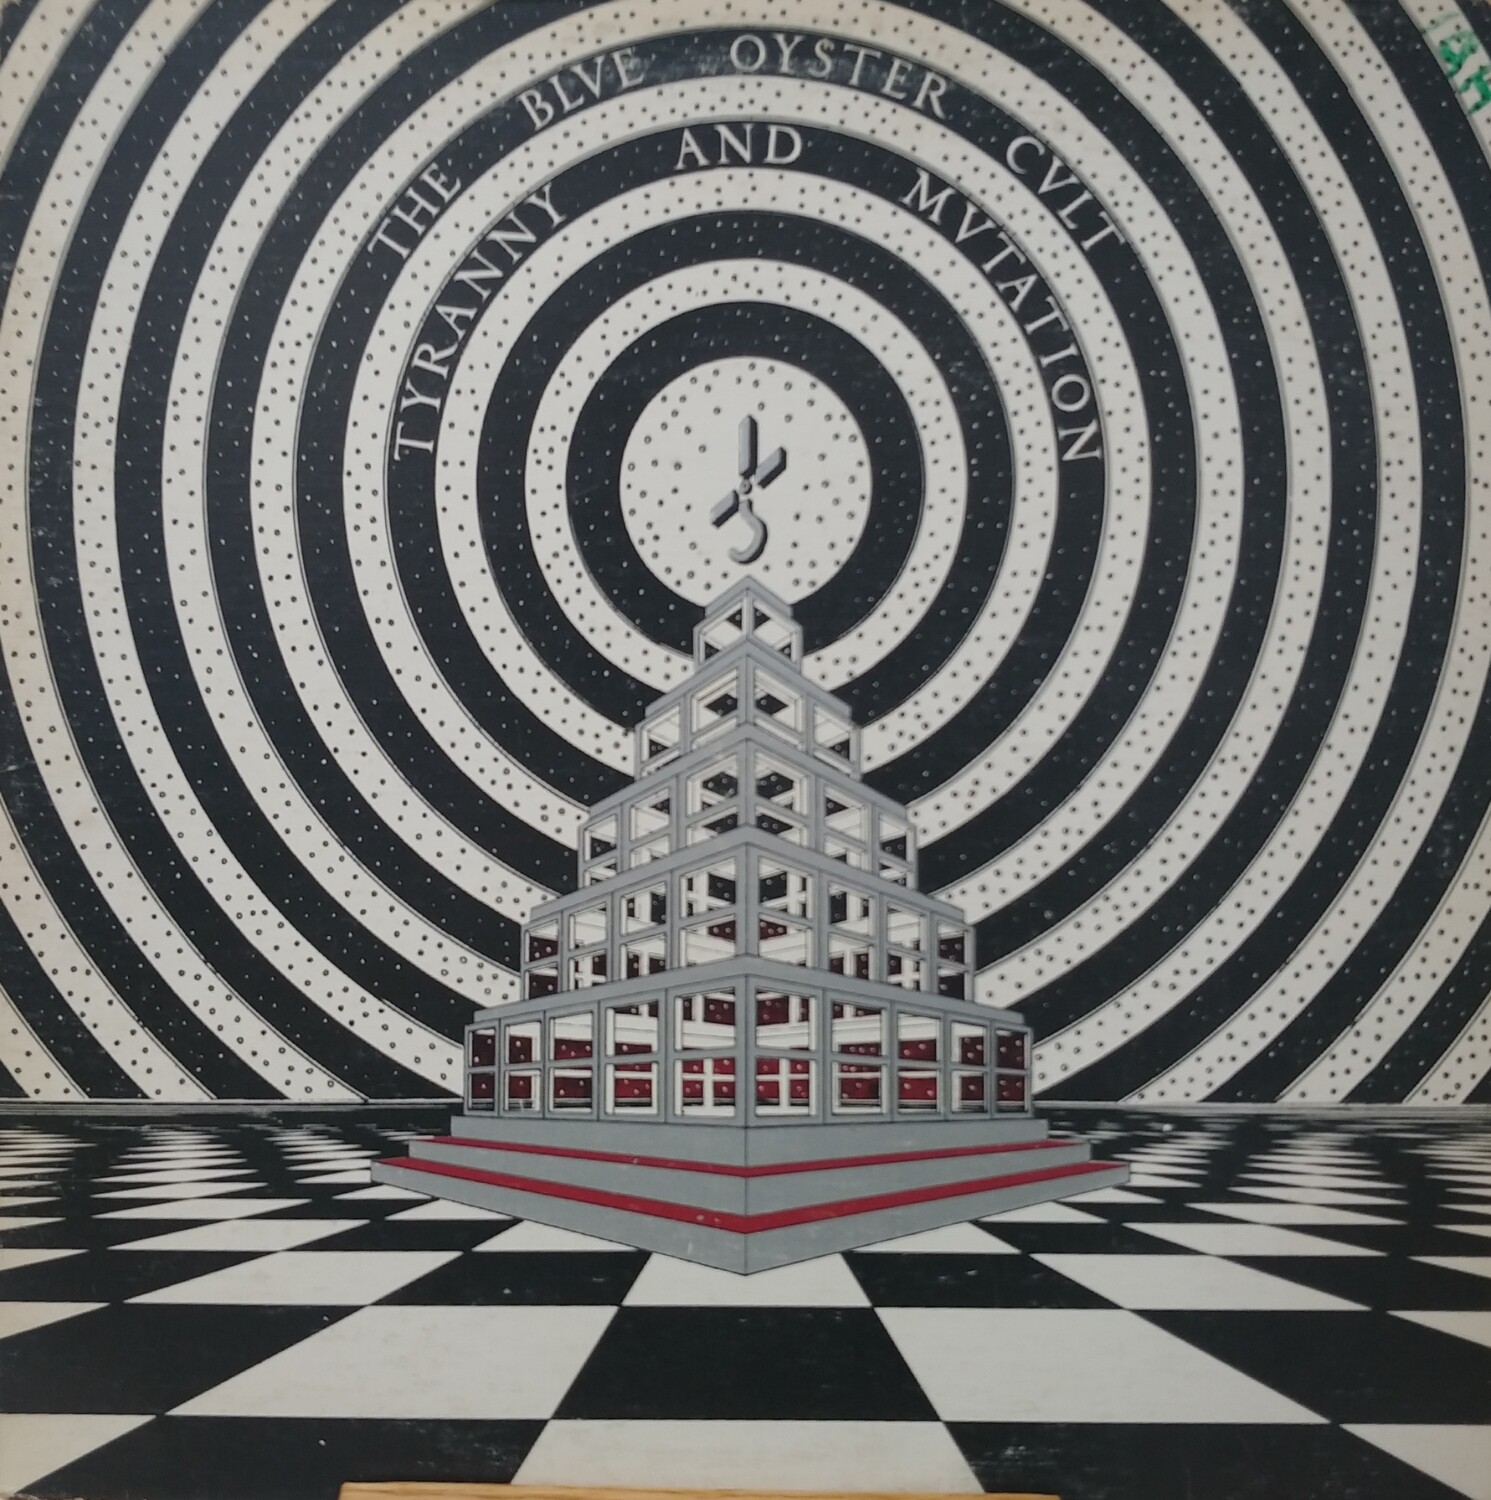 The Blue Oyster Cult - Tyranny and mutation